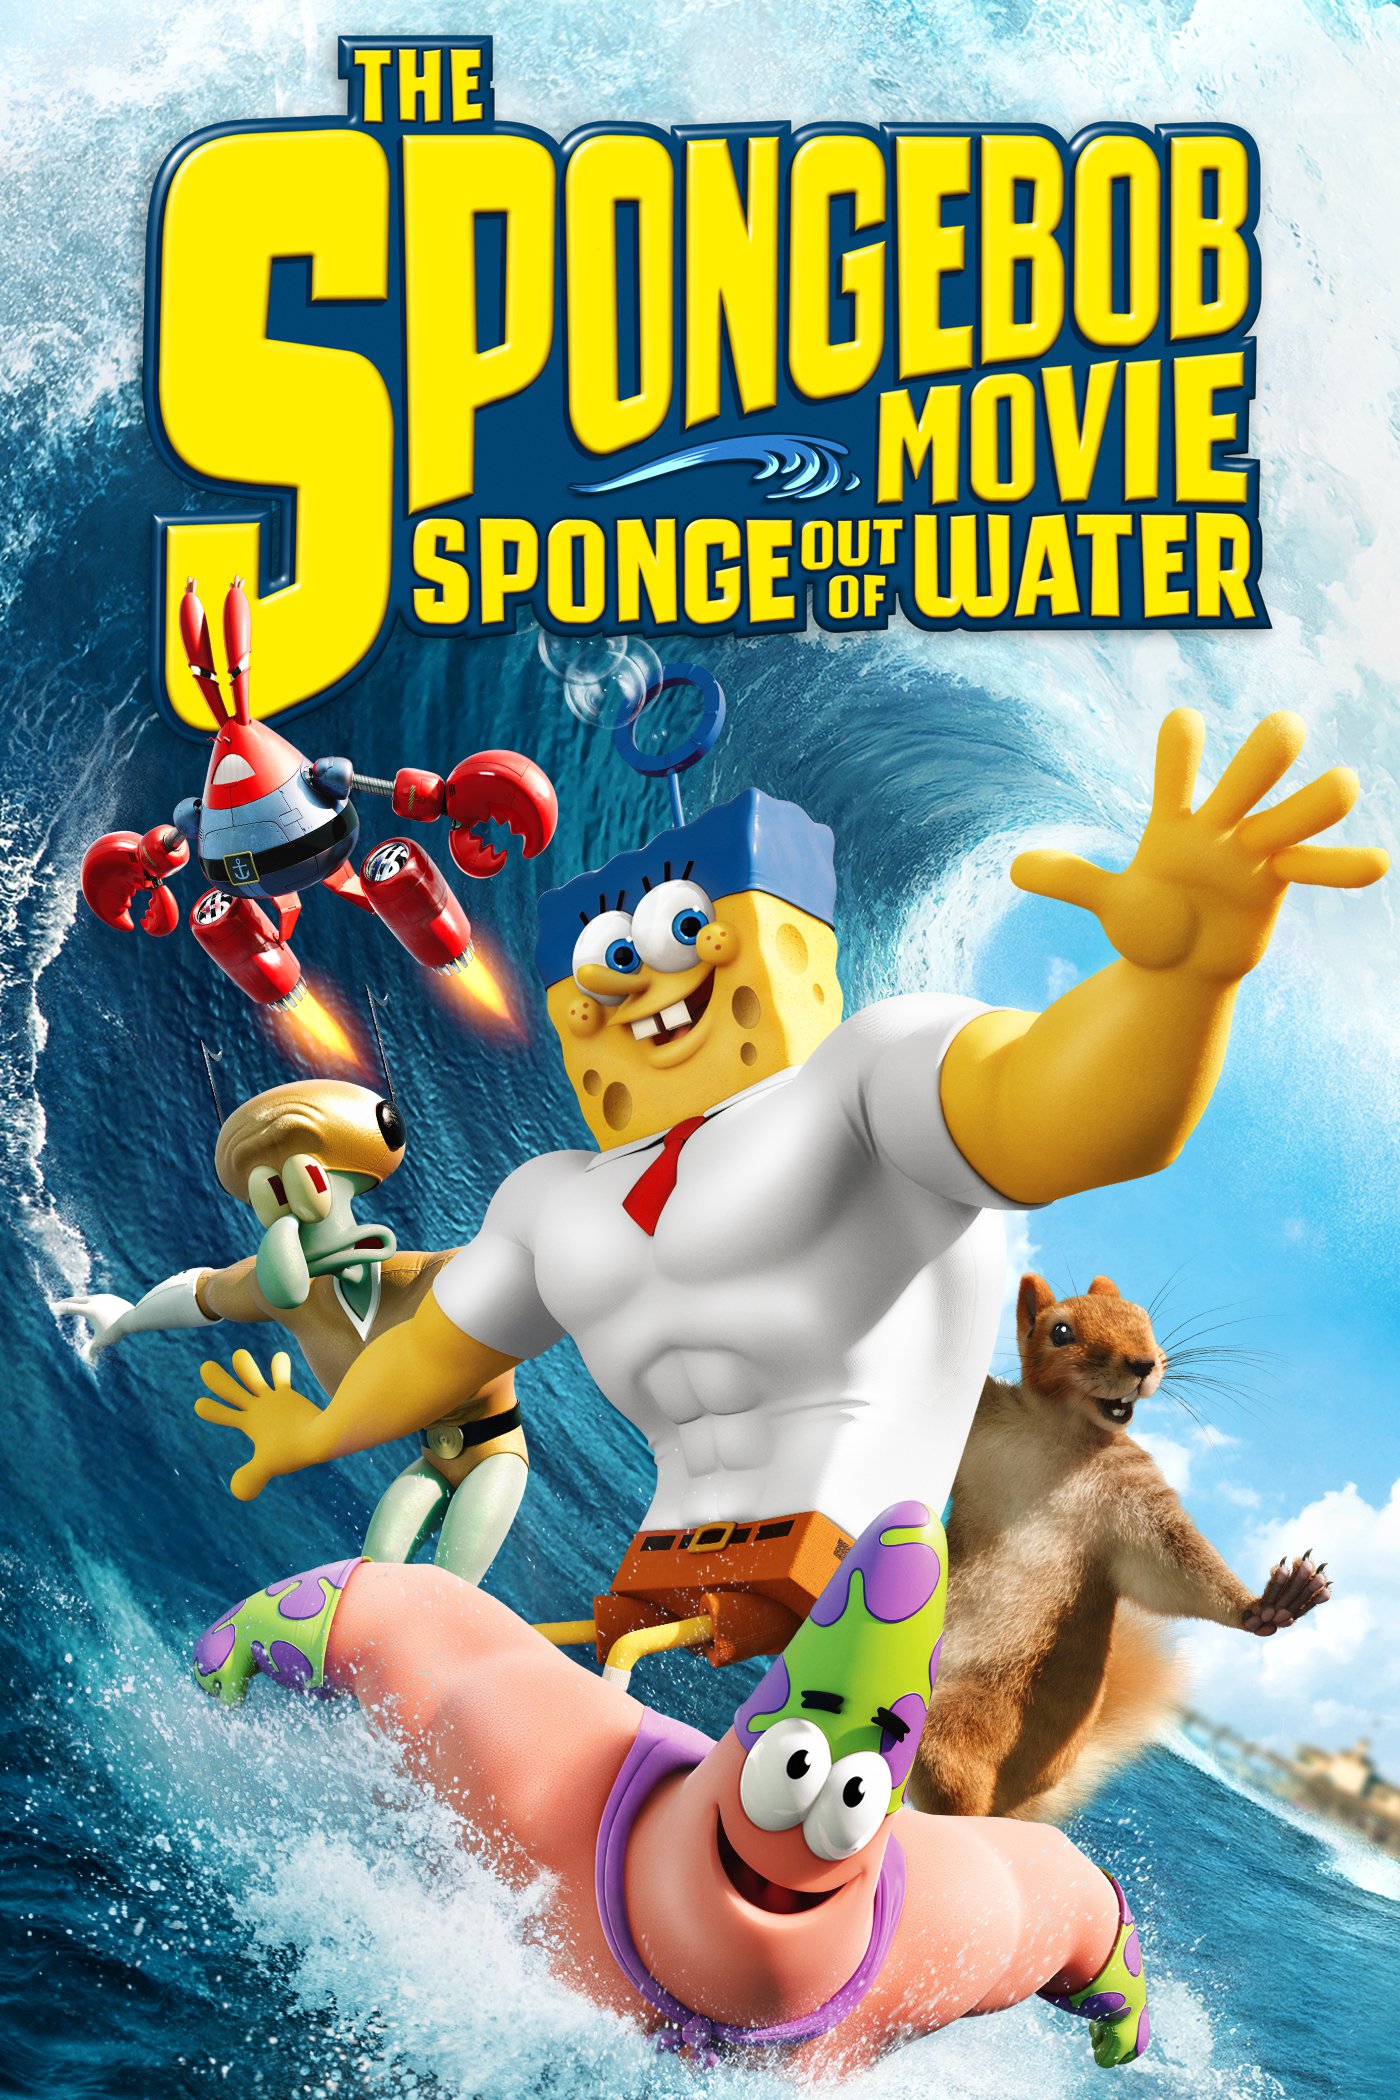 Poster for the movie "The SpongeBob Movie: Sponge Out of Water"